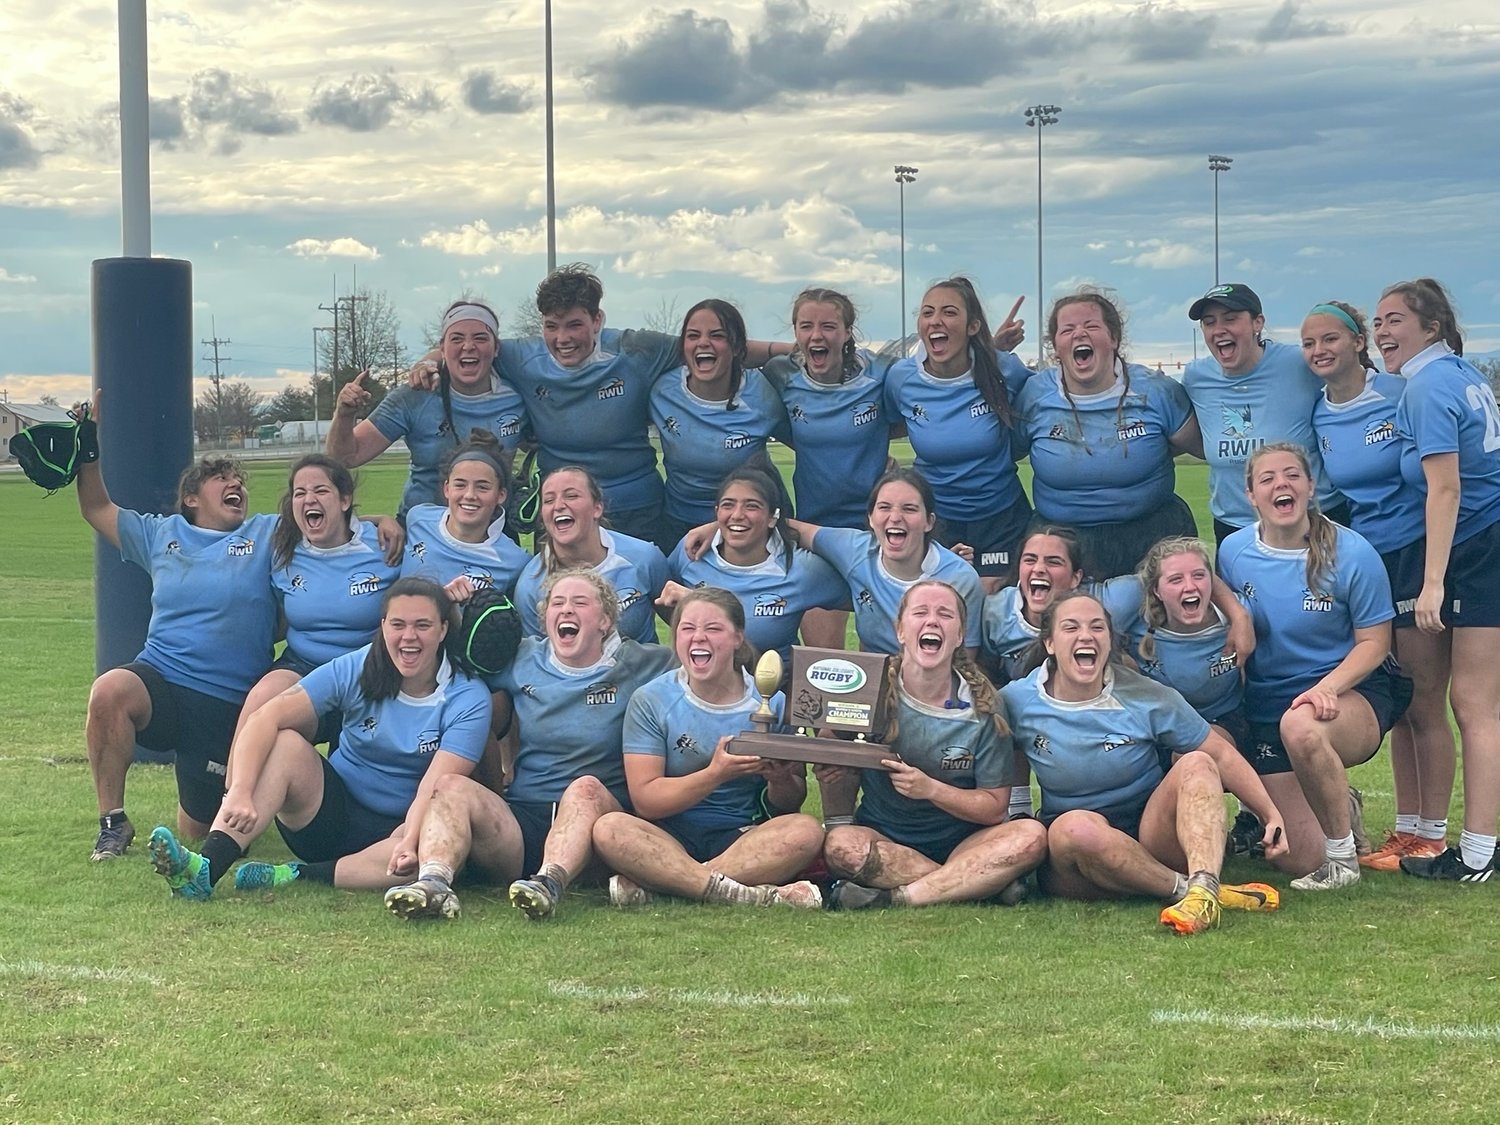 This photo of the RWU women’s rugby team was taken at the regional playoffs in Culpepper, VA, on Nov. 12.